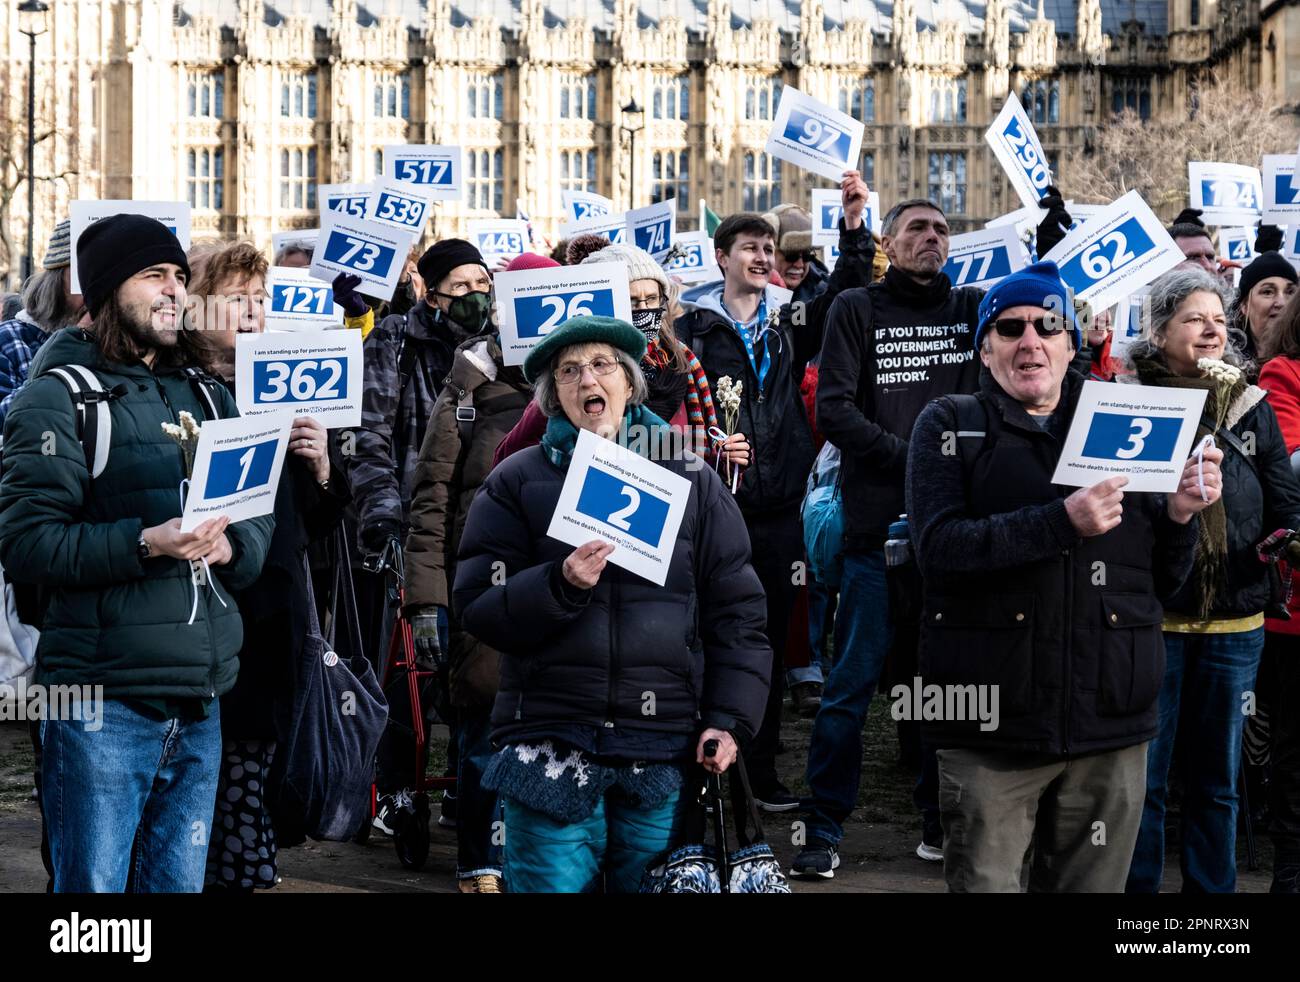 NHS National Health Service anti-privatisation protest in Trafalgar Square on 25 February 2023. Organized by We Own it following  a recent Oxford University study linking increased outsourcing of NHS services to the preventable deaths of 557 people since 2013. Stock Photo